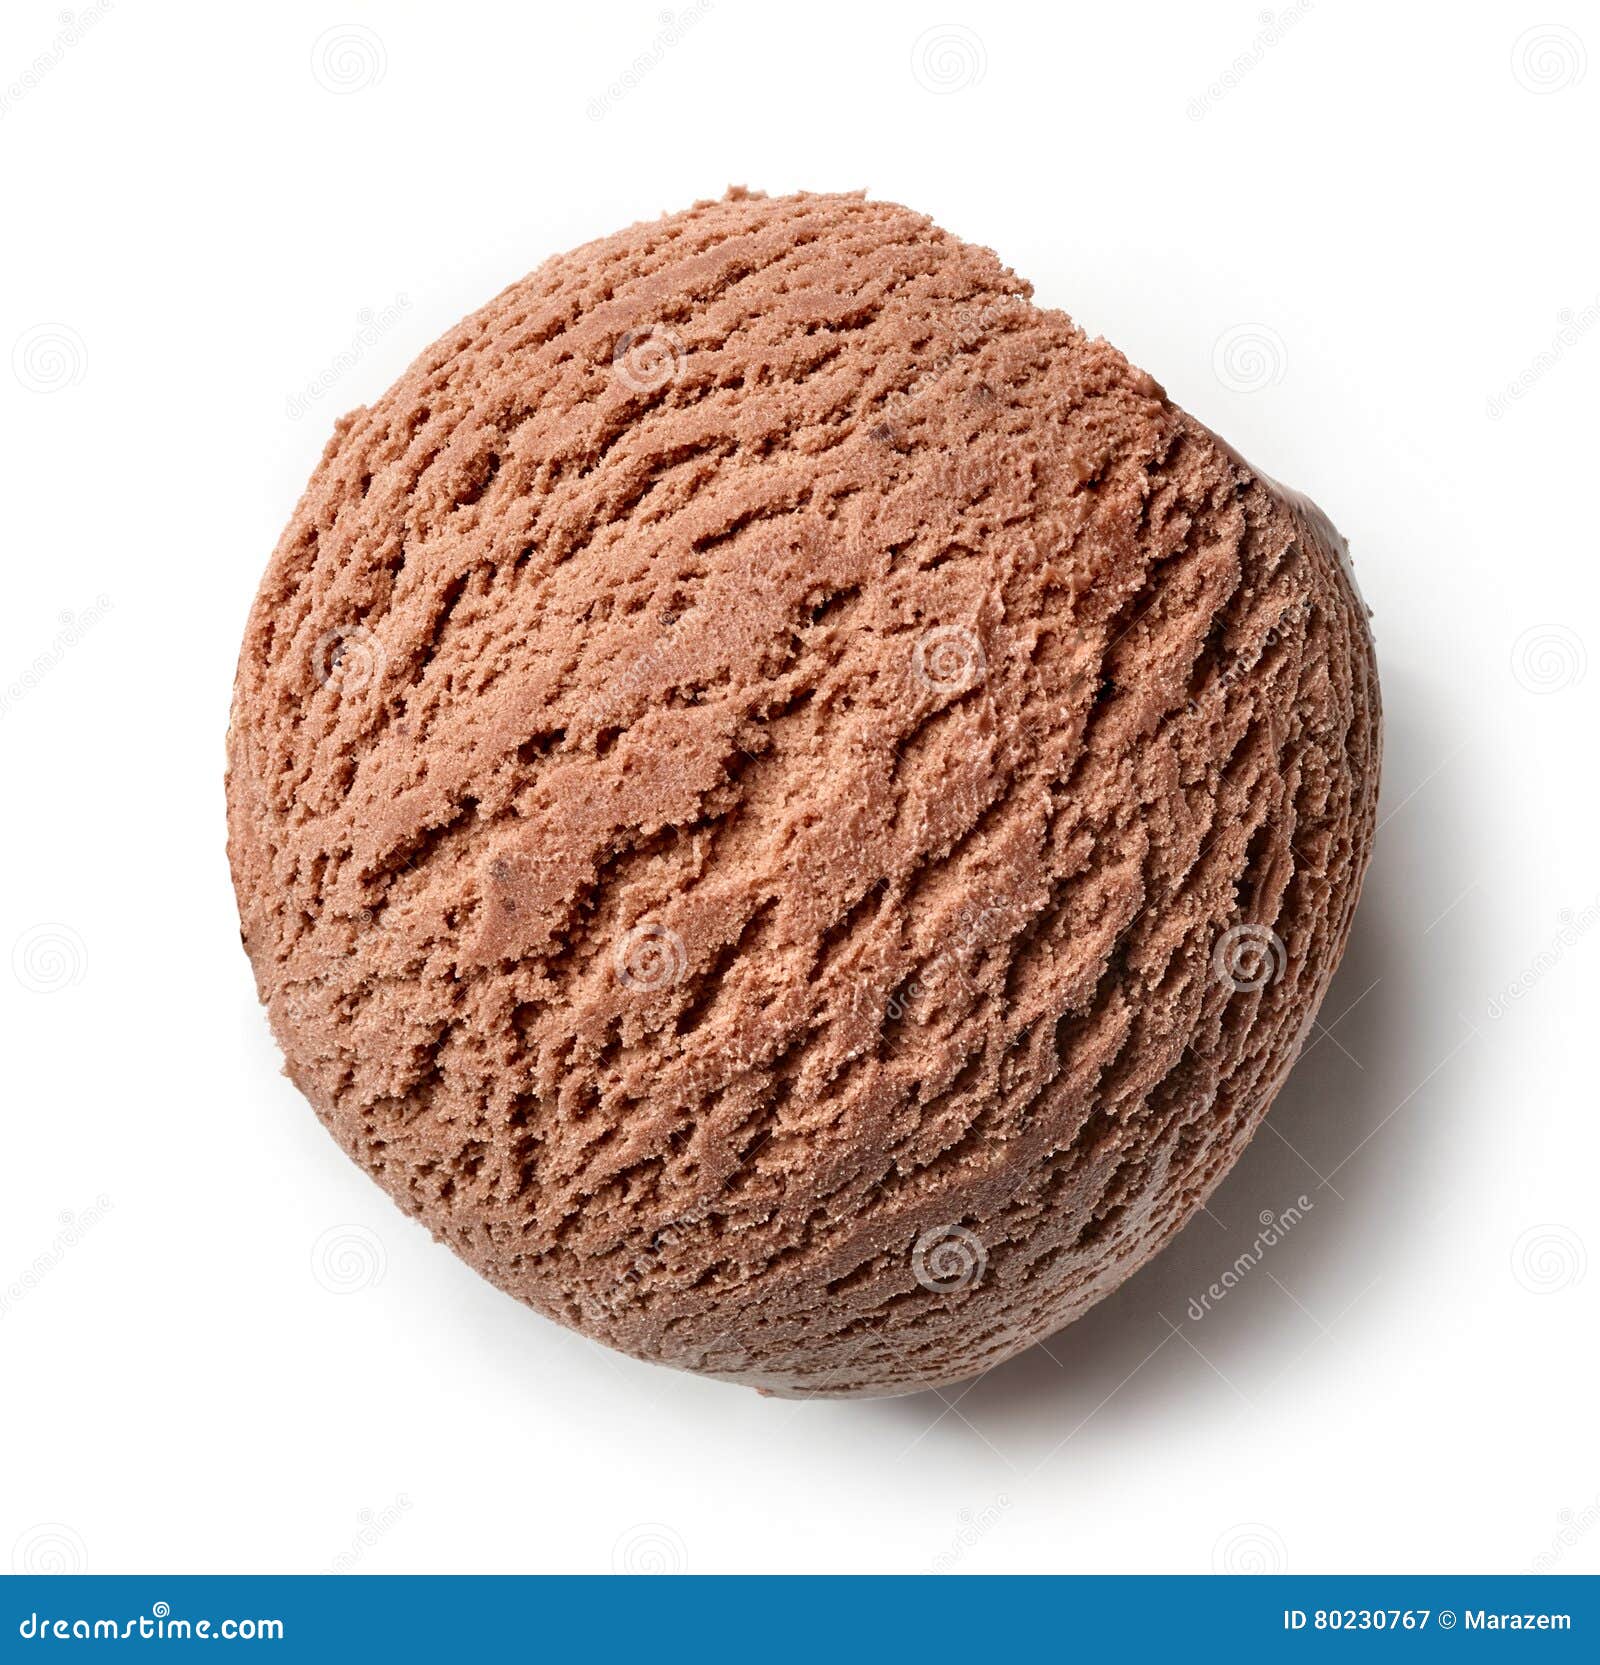 Free Photo  Chocolate ice cream scoop ball with chocolate chips